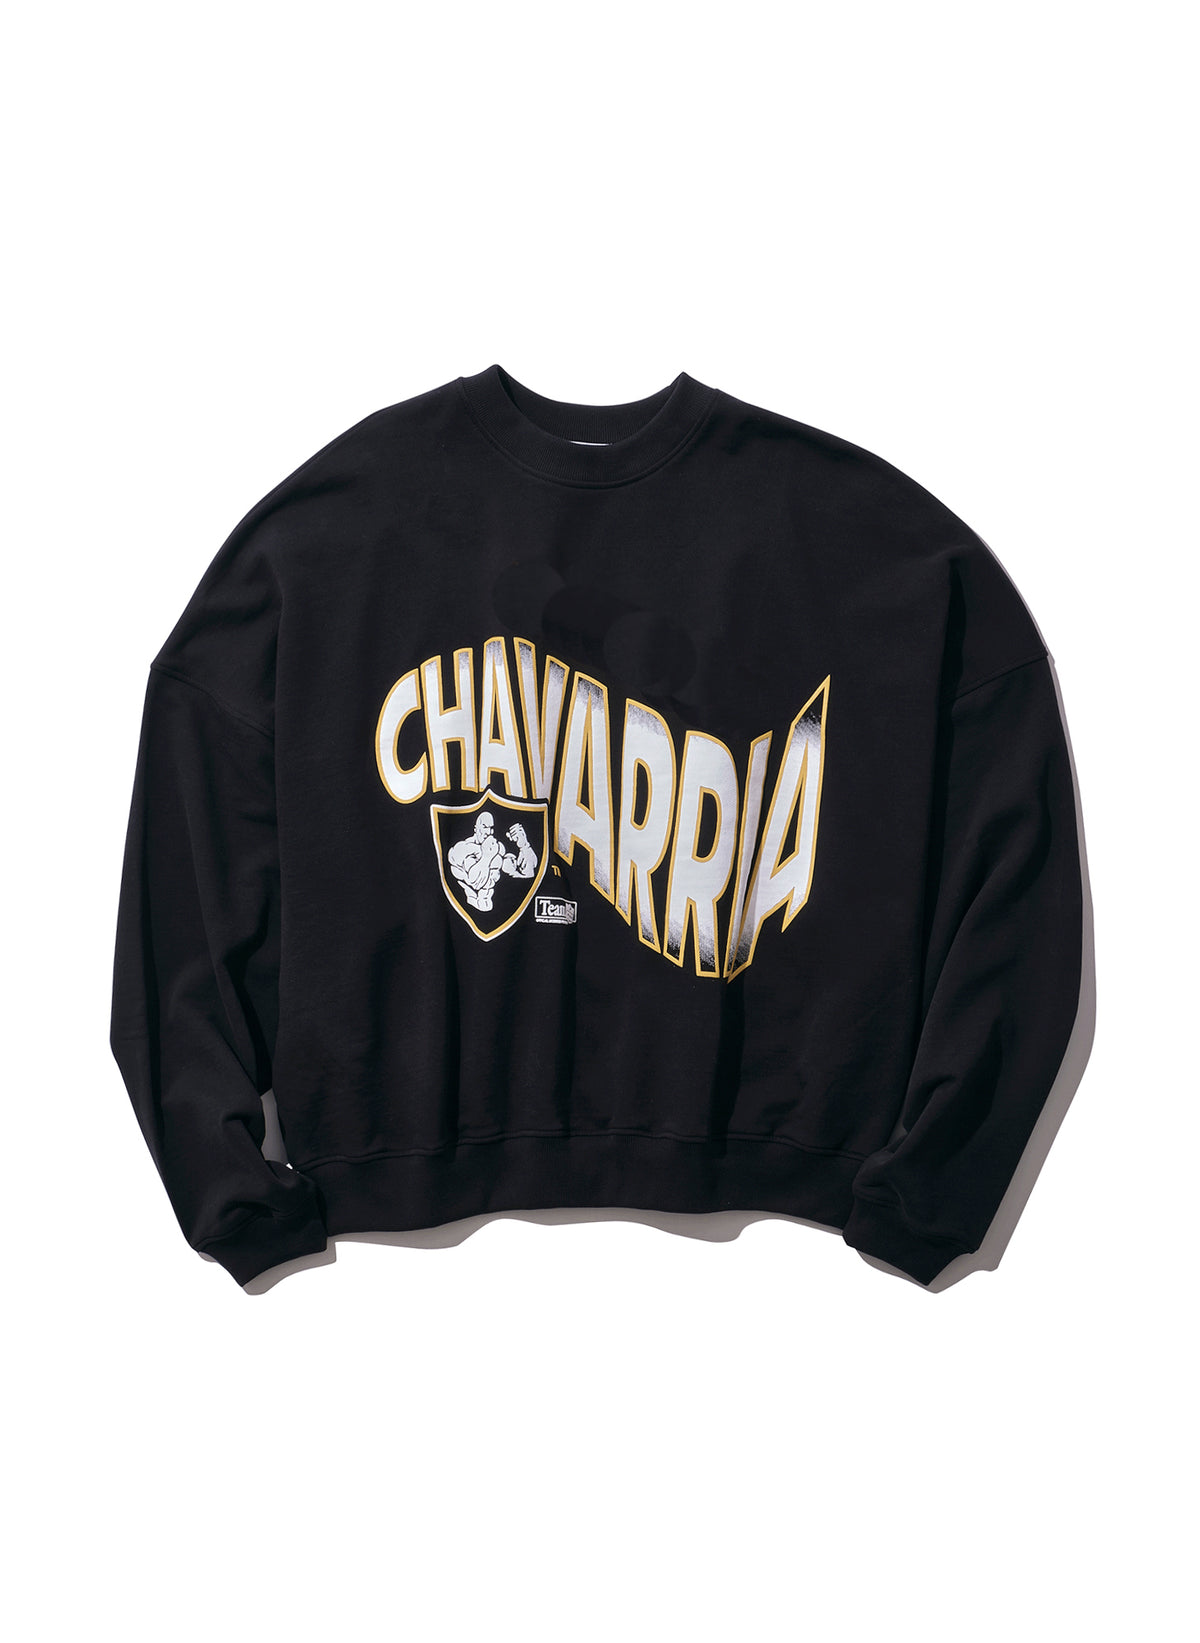 【RESTOCK】 WILLY CHAVARRIA / PITTSBURG BOMBER CREW SOLID BLACK